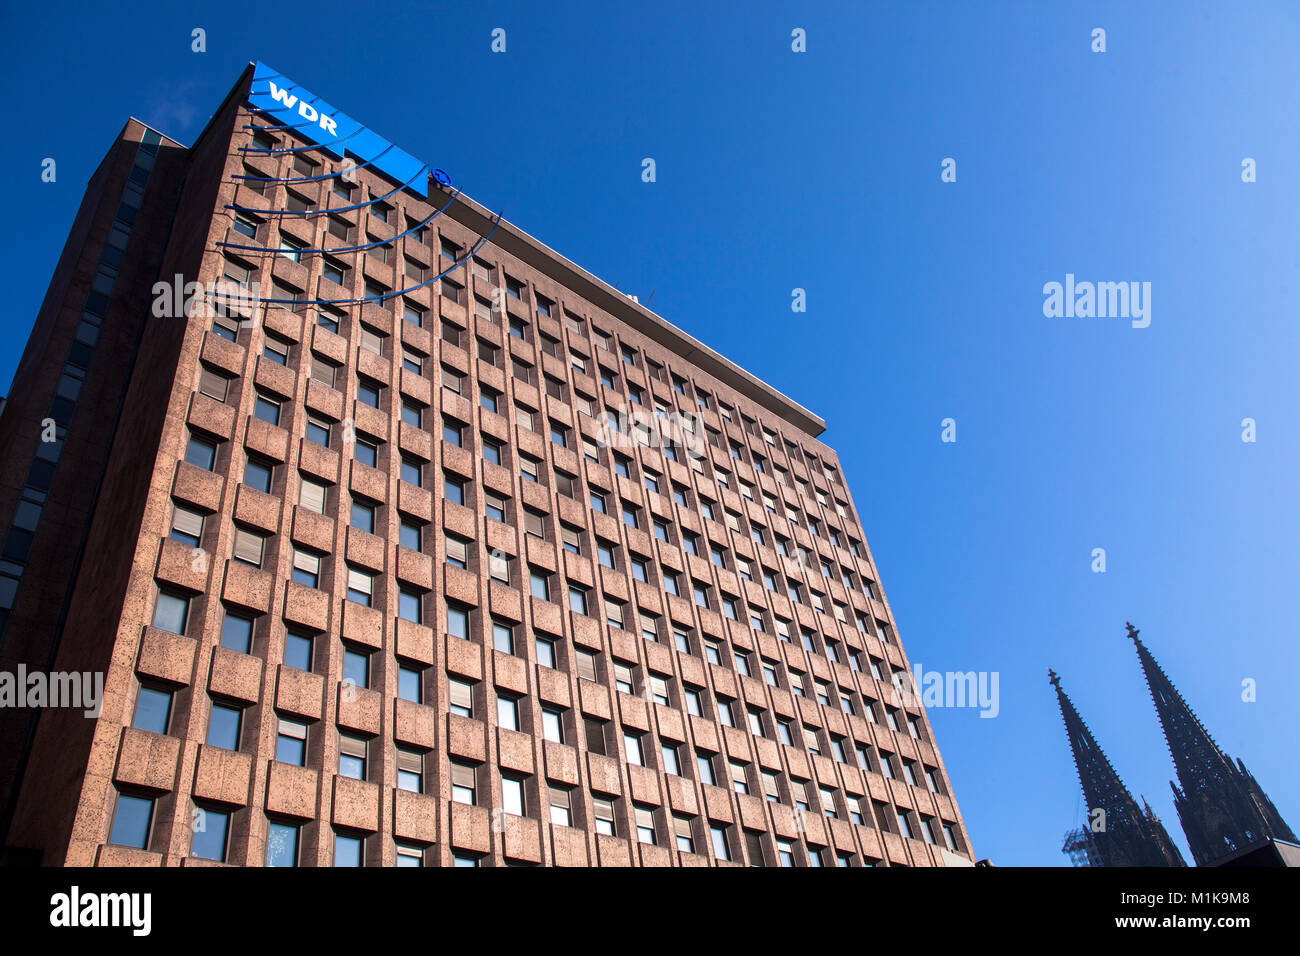 Germany, Cologne, the Archivhaus building of the Westdeutscher Rundfunk or West German Broadcasting Cologne, a German public-broadcasting institution, Stock Photo